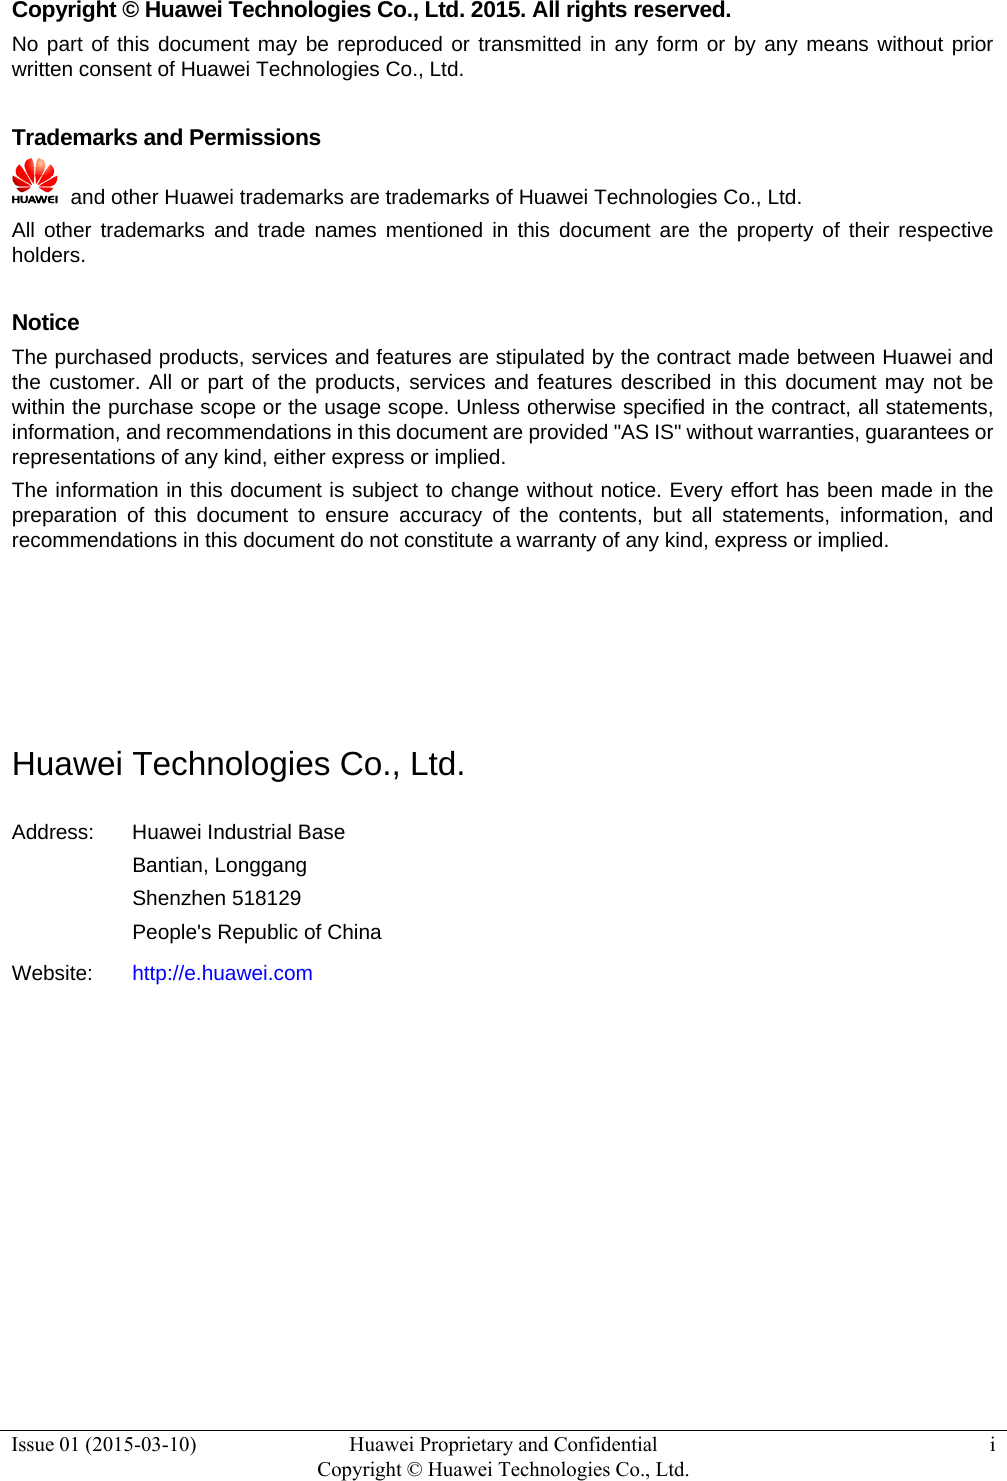  Issue 01 (2015-03-10)  Huawei Proprietary and Confidential         Copyright © Huawei Technologies Co., Ltd.i  Copyright © Huawei Technologies Co., Ltd. 2015. All rights reserved. No part of this document may be reproduced or transmitted in any form or by any means without prior written consent of Huawei Technologies Co., Ltd.  Trademarks and Permissions   and other Huawei trademarks are trademarks of Huawei Technologies Co., Ltd. All other trademarks and trade names mentioned in this document are the property of their respective holders.  Notice The purchased products, services and features are stipulated by the contract made between Huawei and the customer. All or part of the products, services and features described in this document may not be within the purchase scope or the usage scope. Unless otherwise specified in the contract, all statements, information, and recommendations in this document are provided &quot;AS IS&quot; without warranties, guarantees or representations of any kind, either express or implied. The information in this document is subject to change without notice. Every effort has been made in the preparation of this document to ensure accuracy of the contents, but all statements, information, and recommendations in this document do not constitute a warranty of any kind, express or implied.     Huawei Technologies Co., Ltd. Address:  Huawei Industrial Base Bantian, Longgang Shenzhen 518129 People&apos;s Republic of China Website:  http://e.huawei.com          